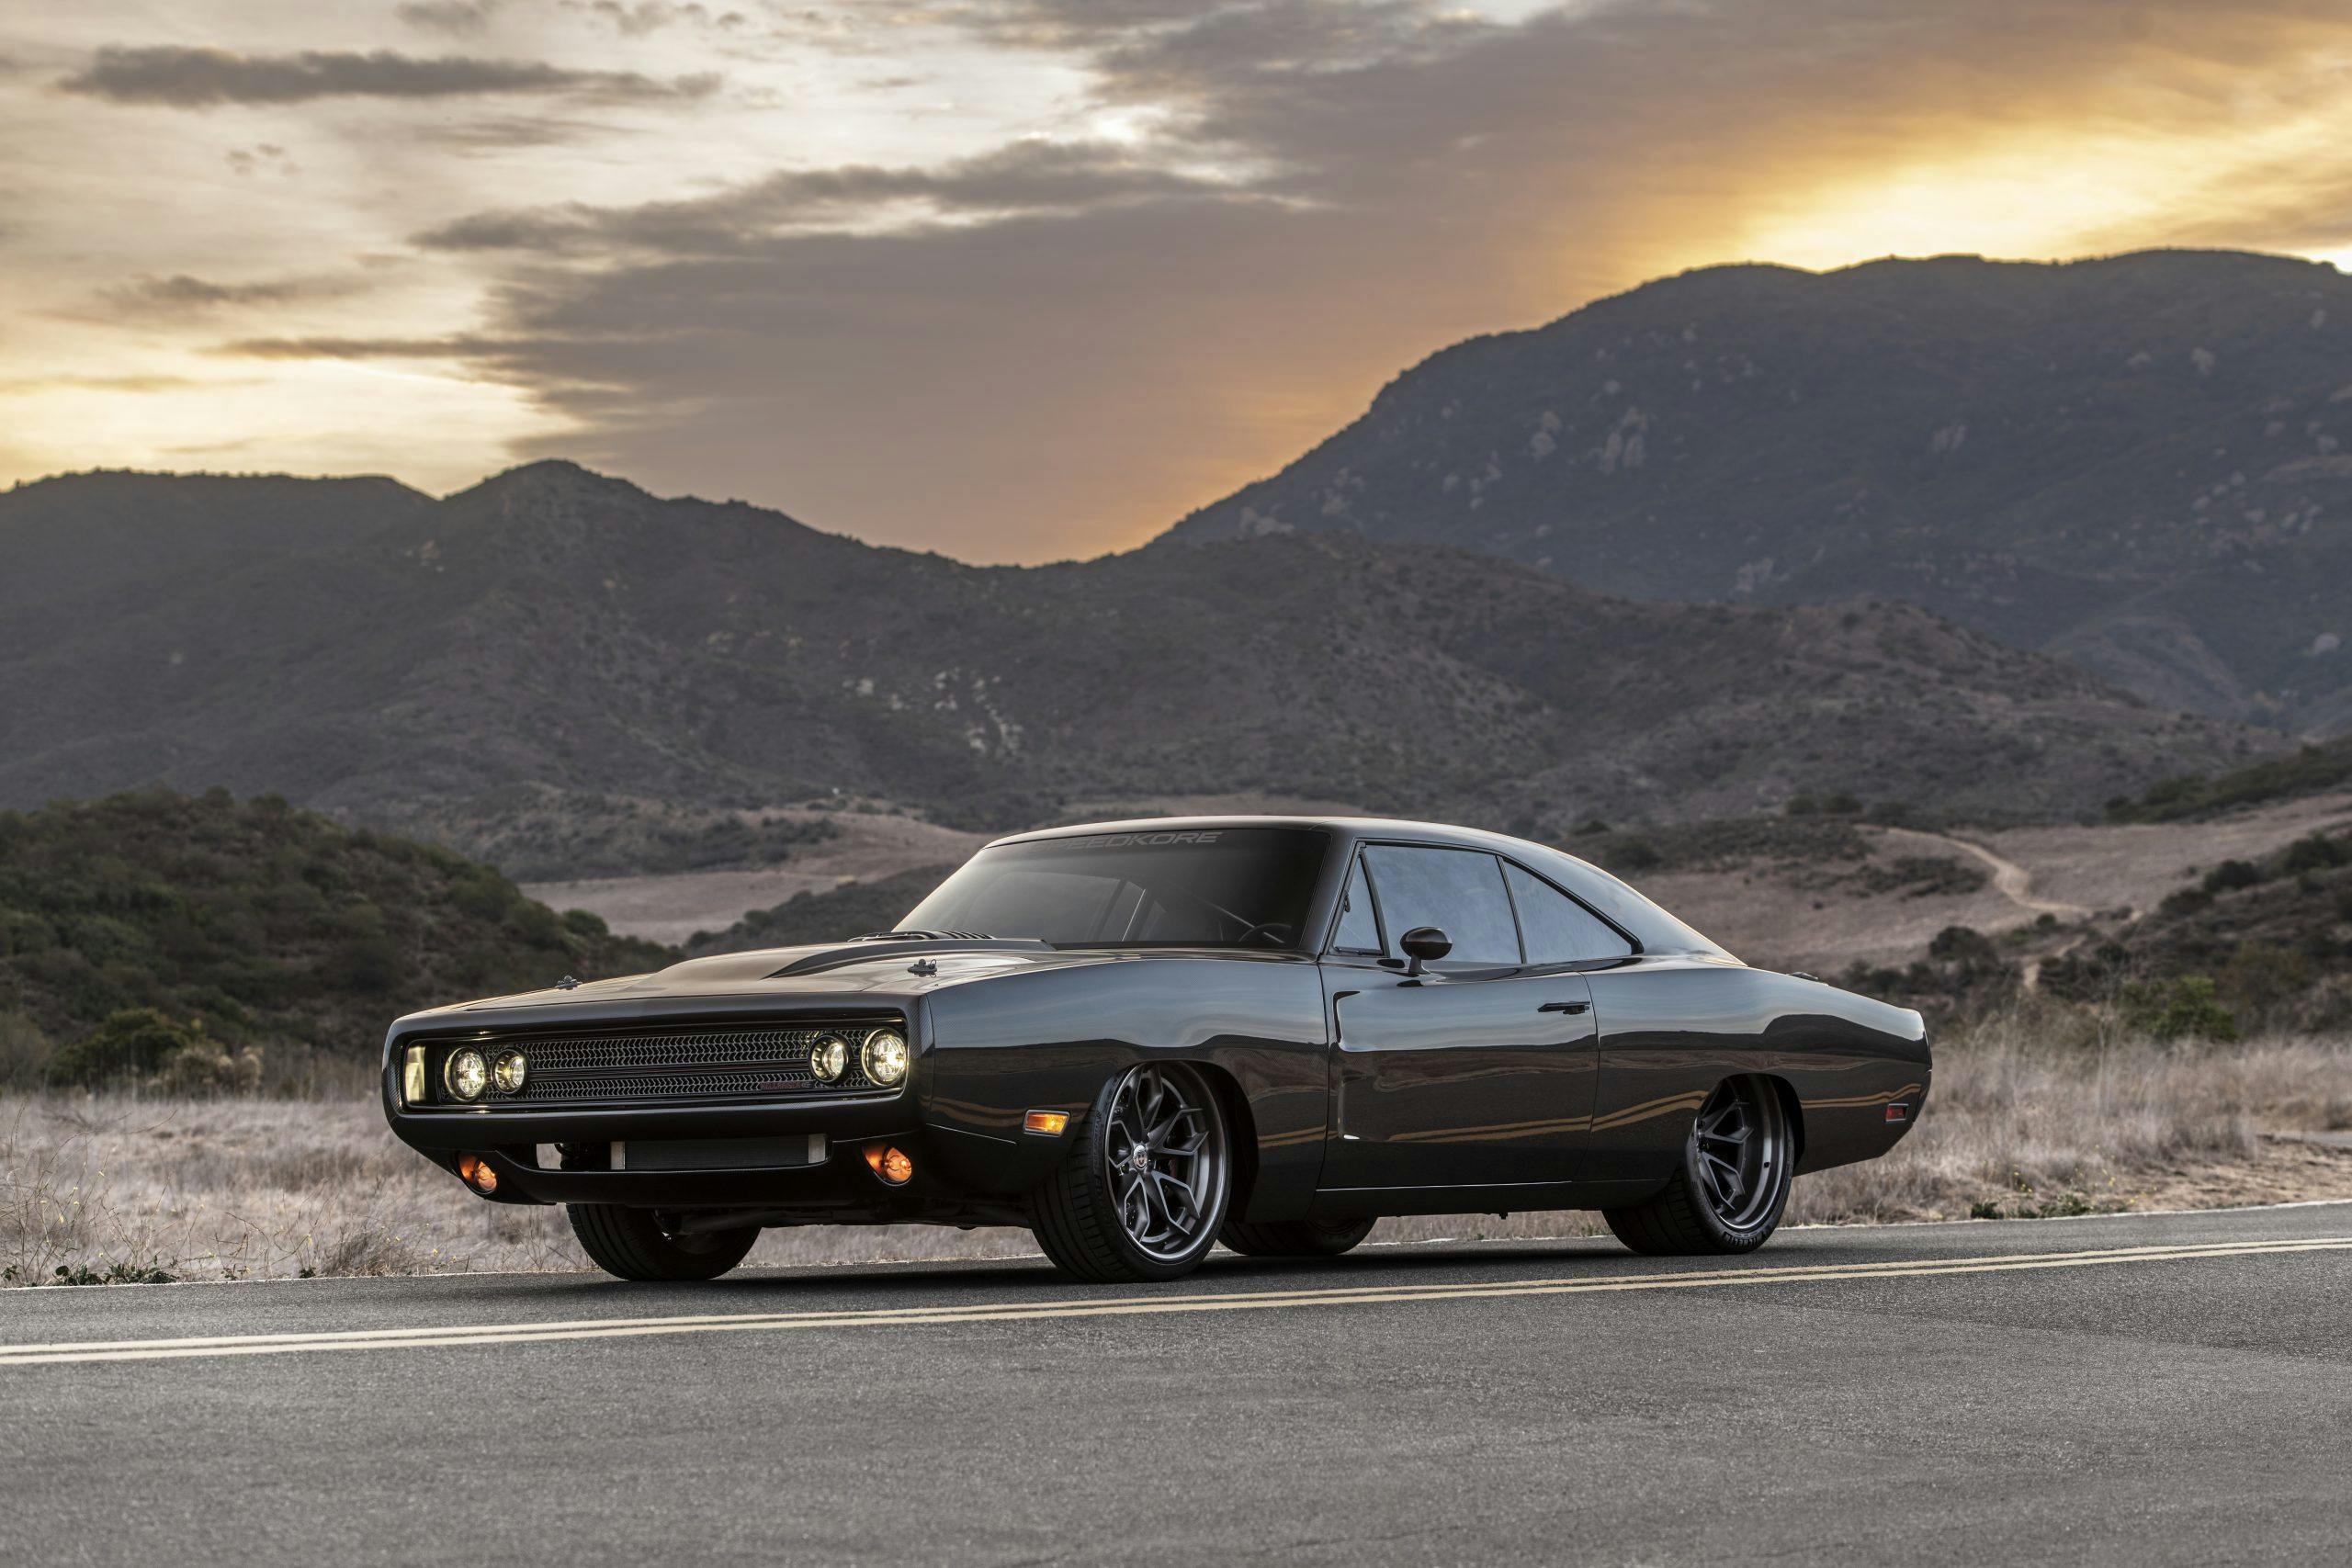 Kevin Hart's new 1000-hp Charger raises hell in carbon fiber - Hagerty Media